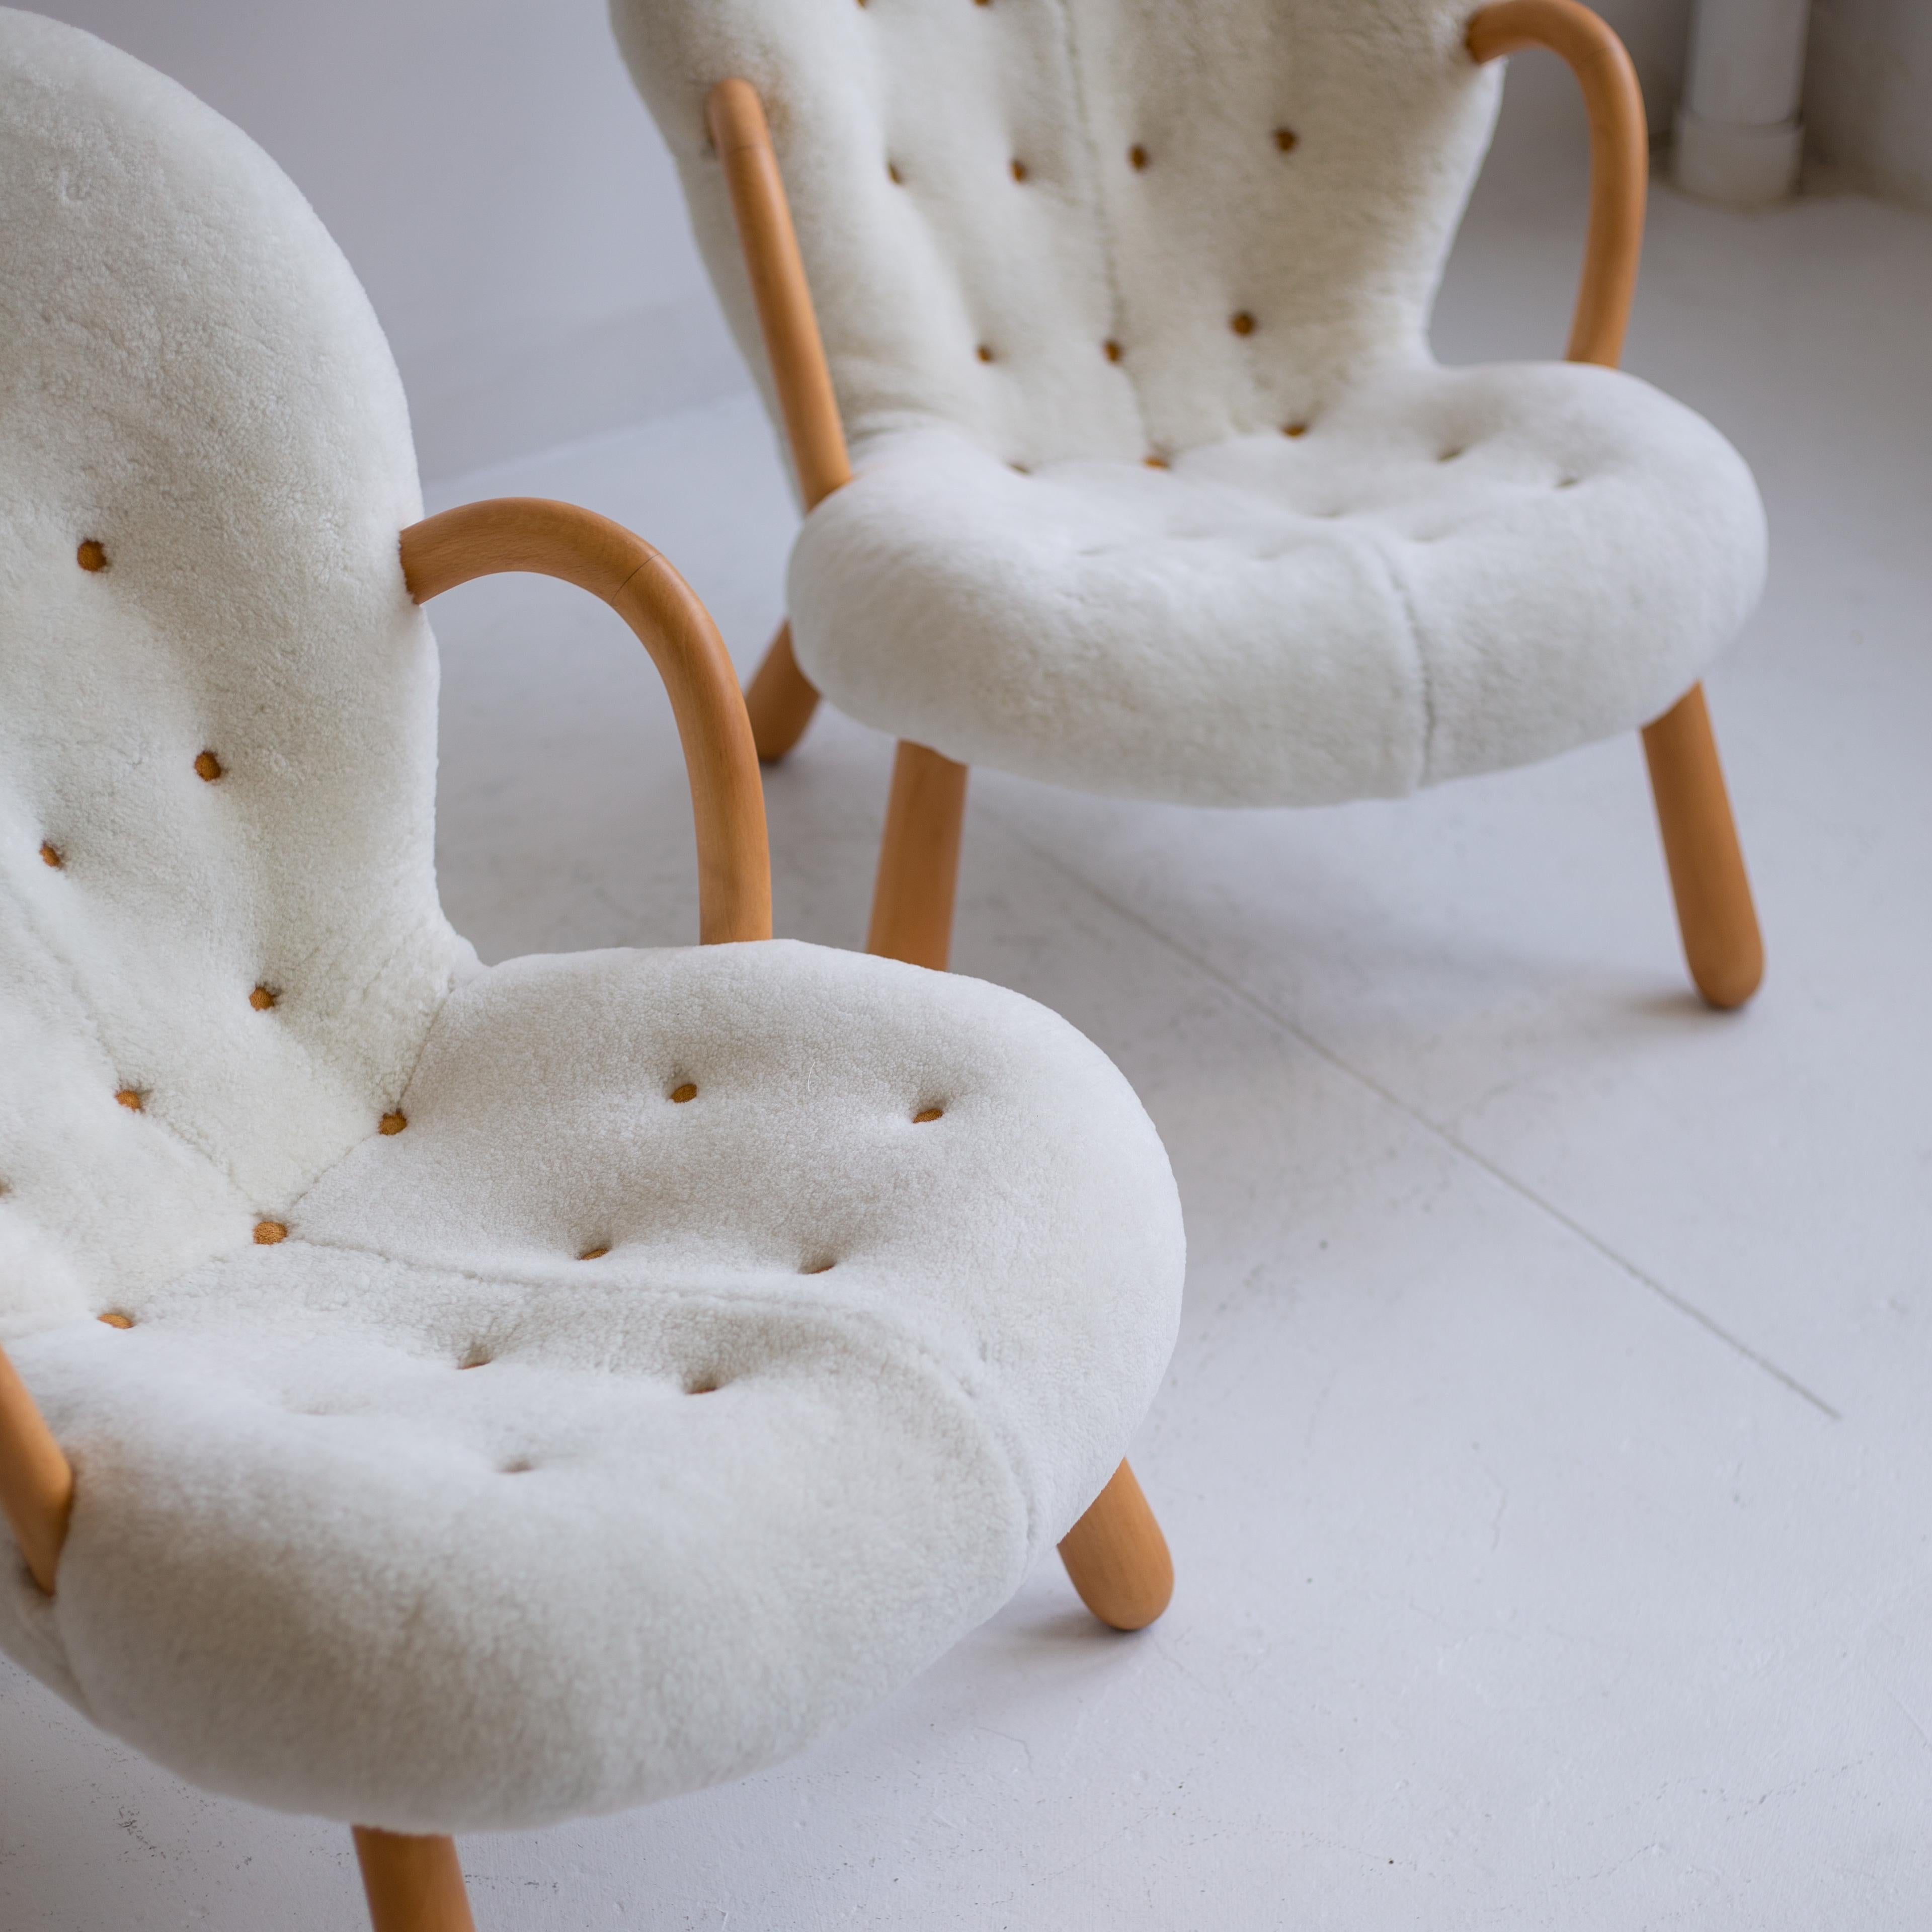 Pair of iconic clam chairs by Philip Arctander newly reupholstered in sheepskin with leather buttons, and wood finish was fully restored recently as well.